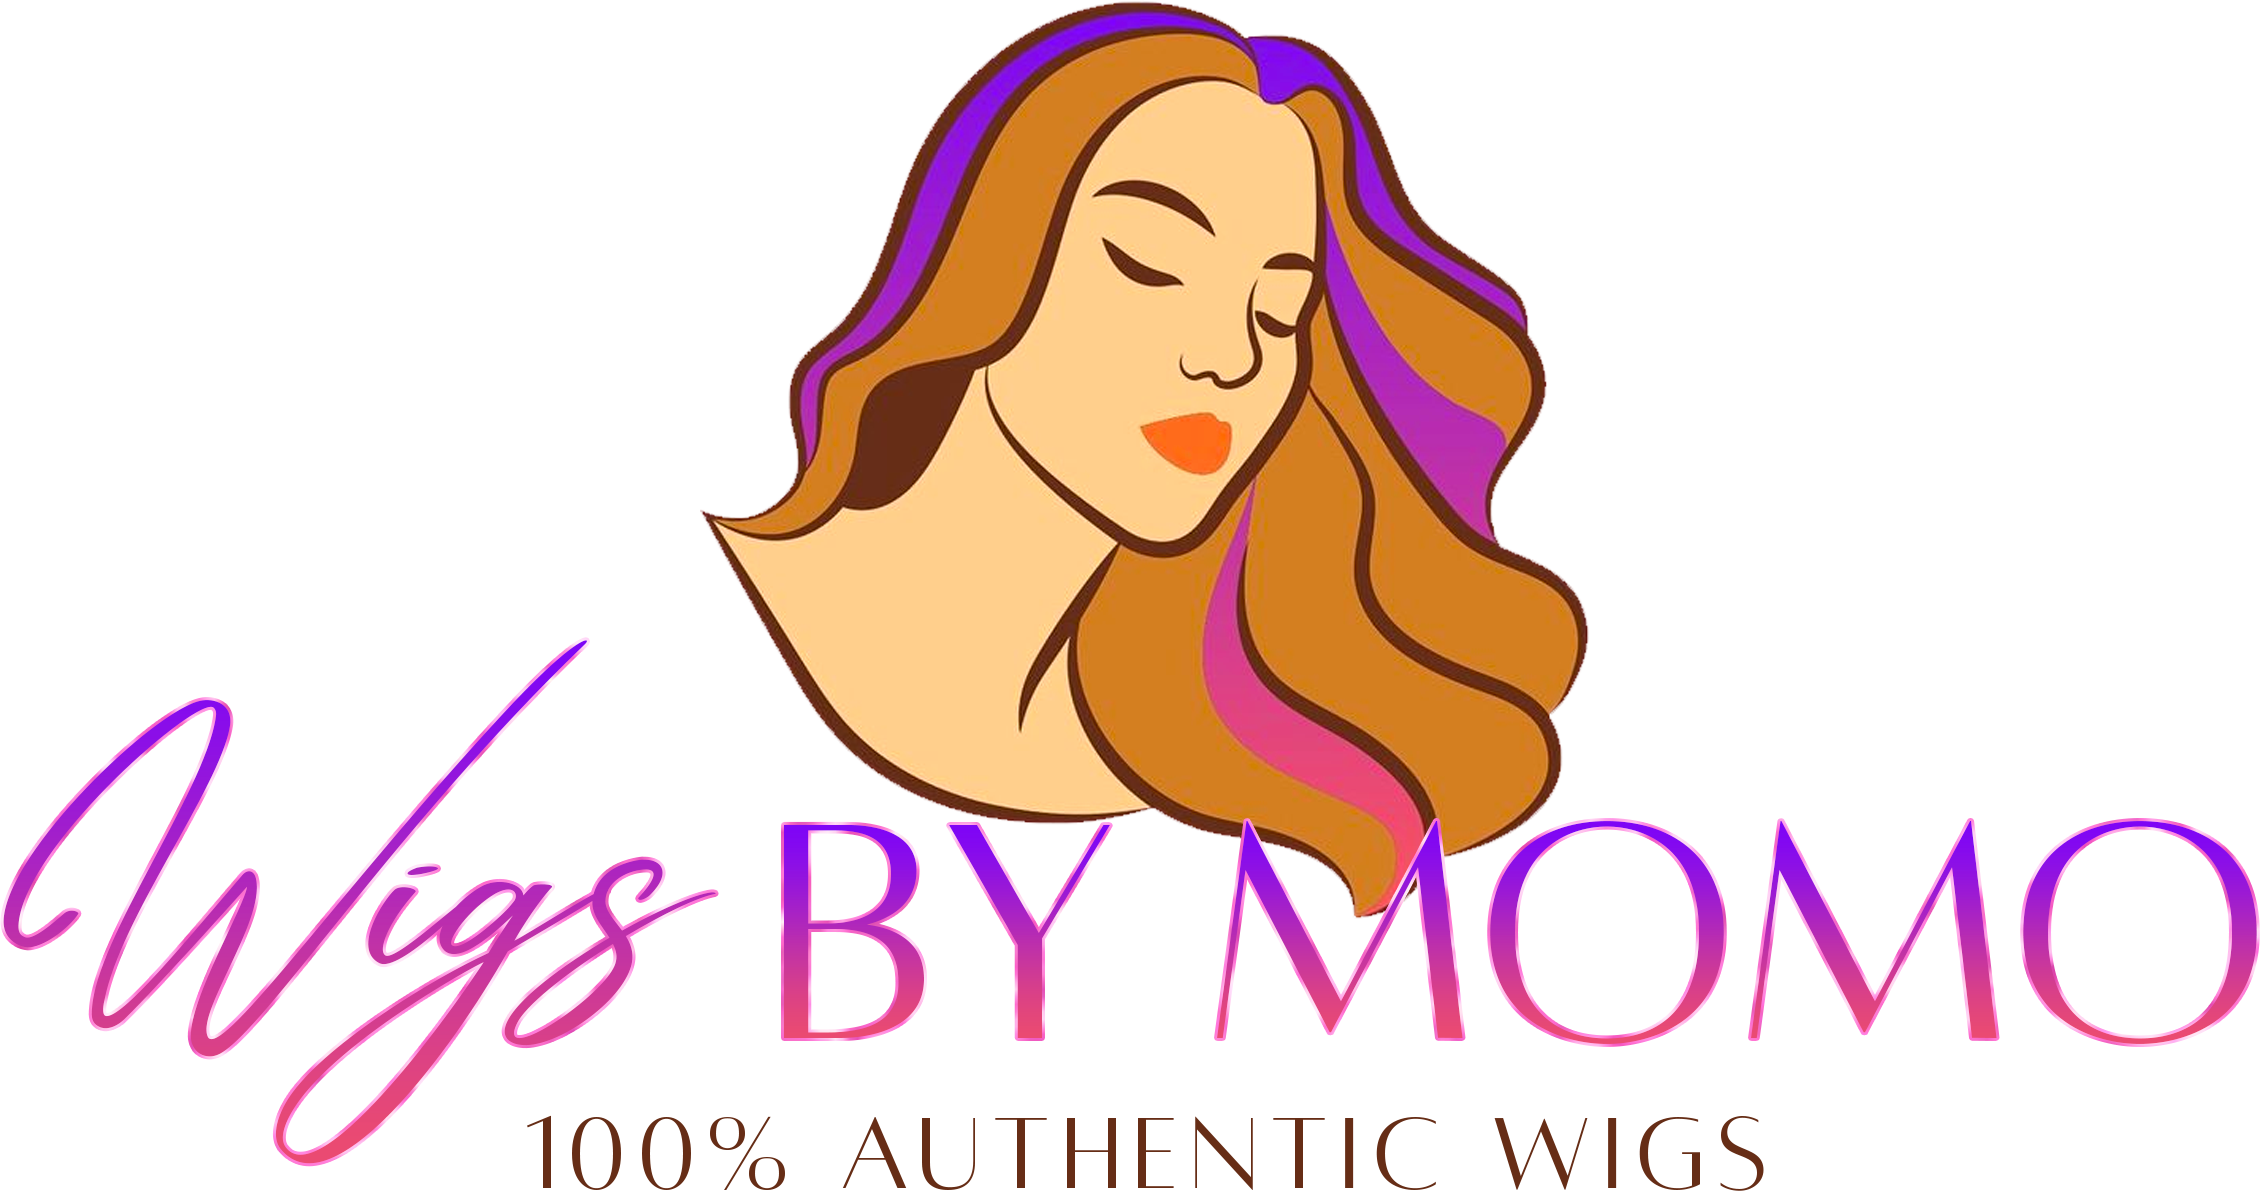 Wigs By Momo